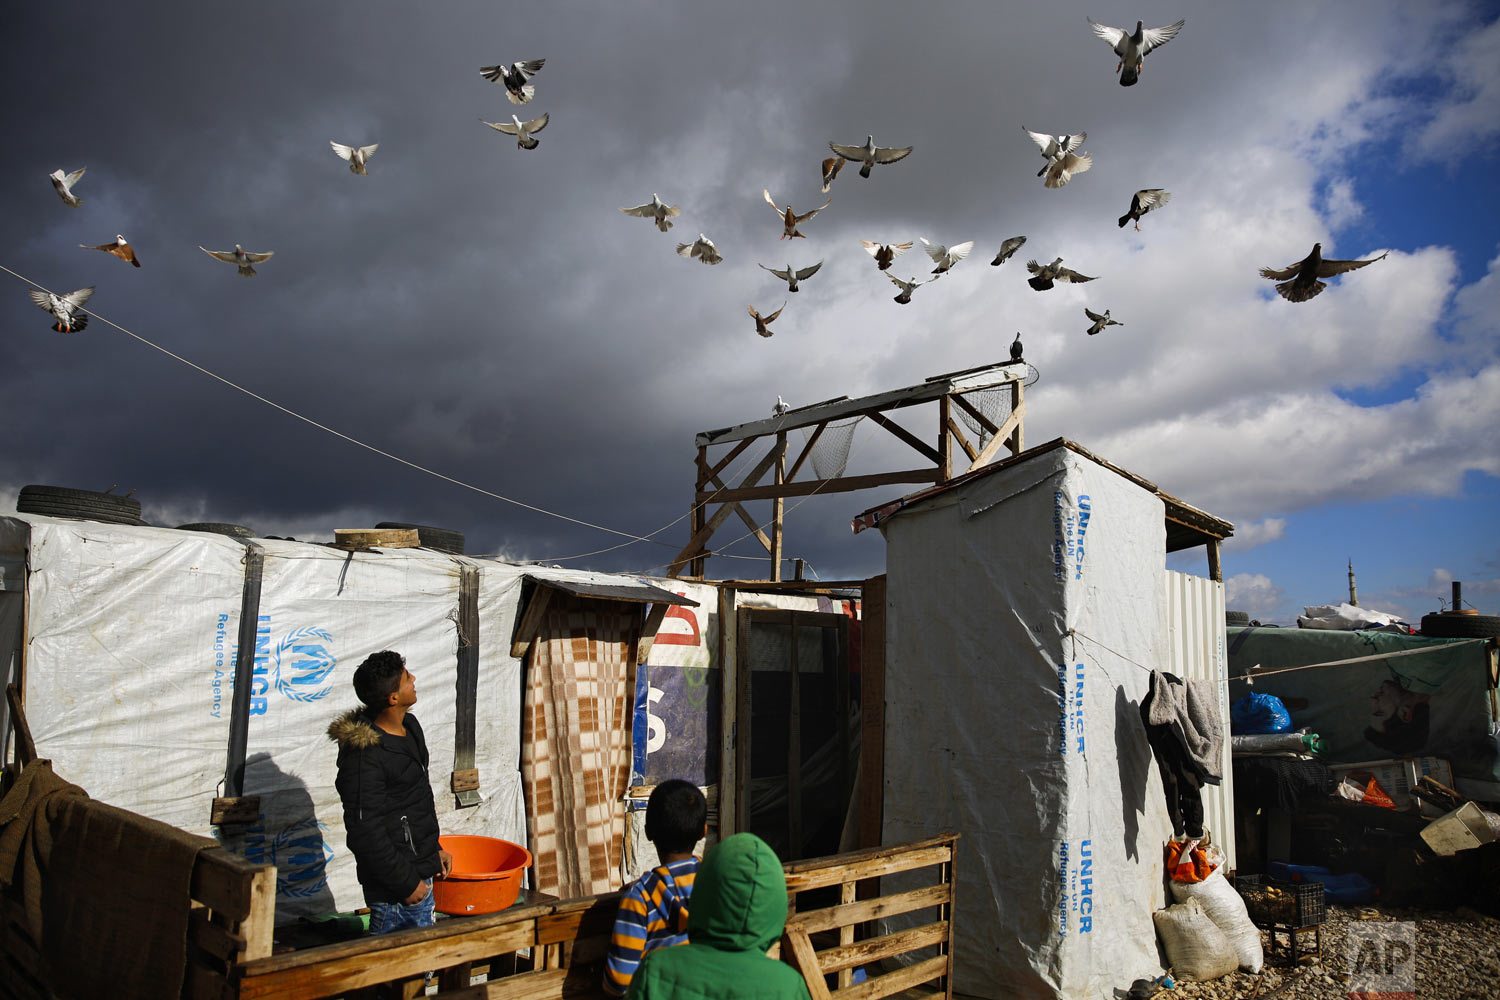  A boy watches his pigeons fly at an informal refugee camp in Zahle city in the eastern Bekaa valley, Lebanon, Monday, Dec. 31, 2018. Temperatures in Bekaa valley took a dip reaching zero degrees Celsius (32 degrees Fahrenheit) Monday early morning. 